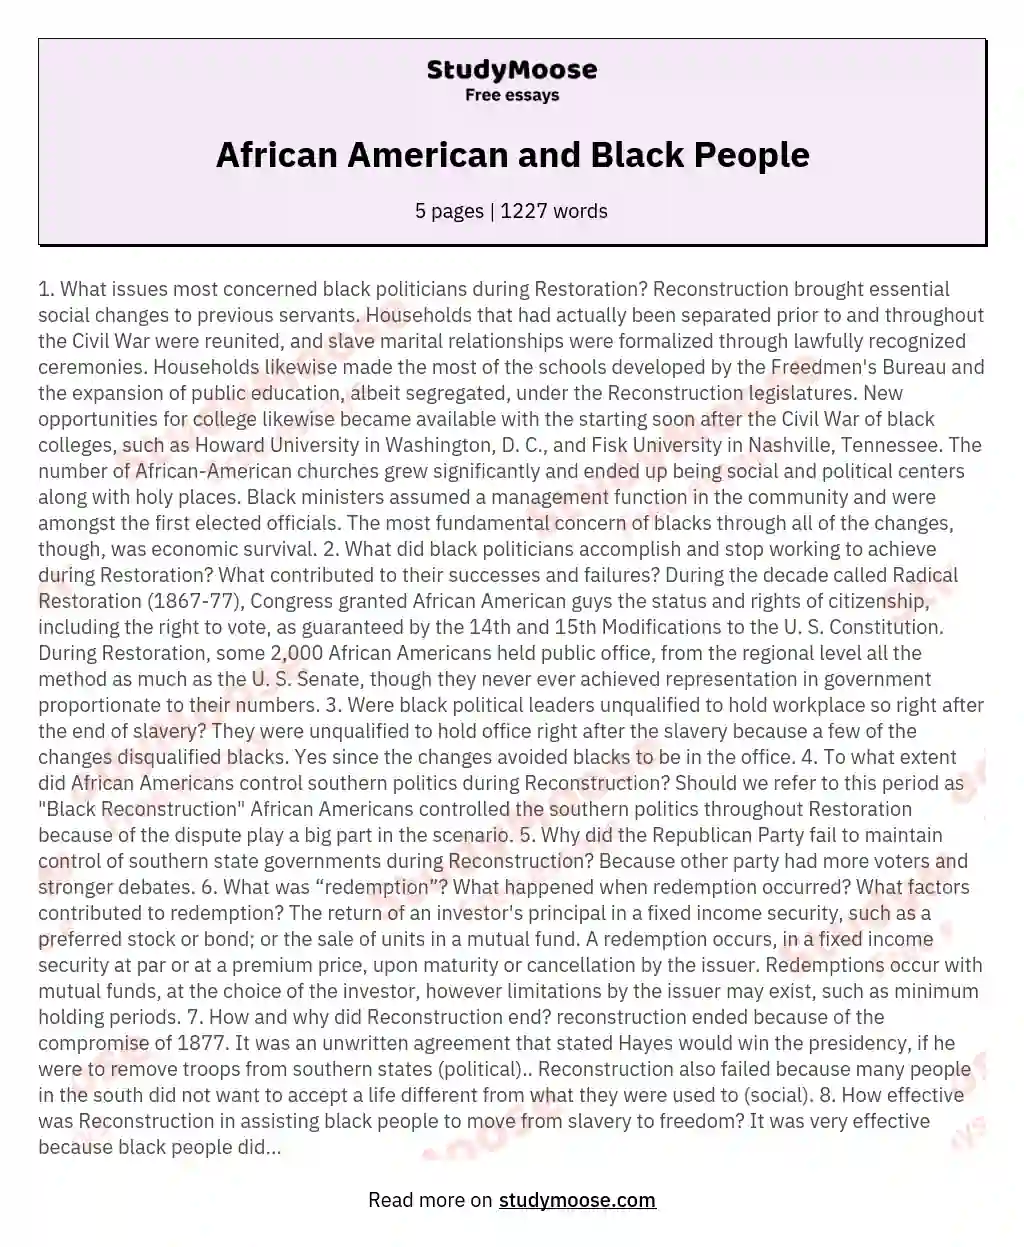 African American and Black People